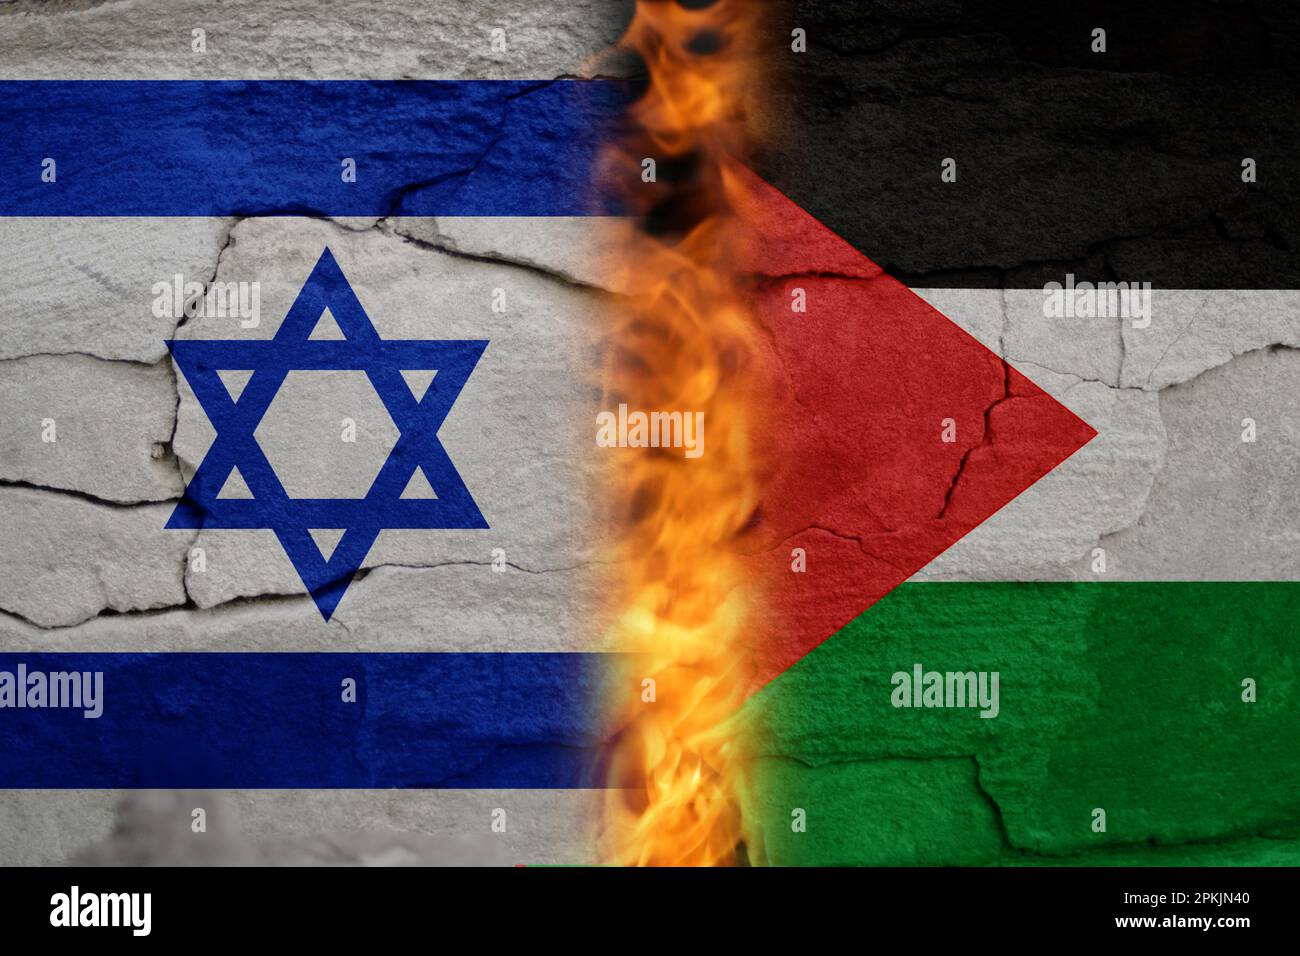 Israel Palestine war. Concept of crisis of war and political conflicts between nations. Flags. Fire, flames. Cracked stone background. Out of focus. Stock Photo